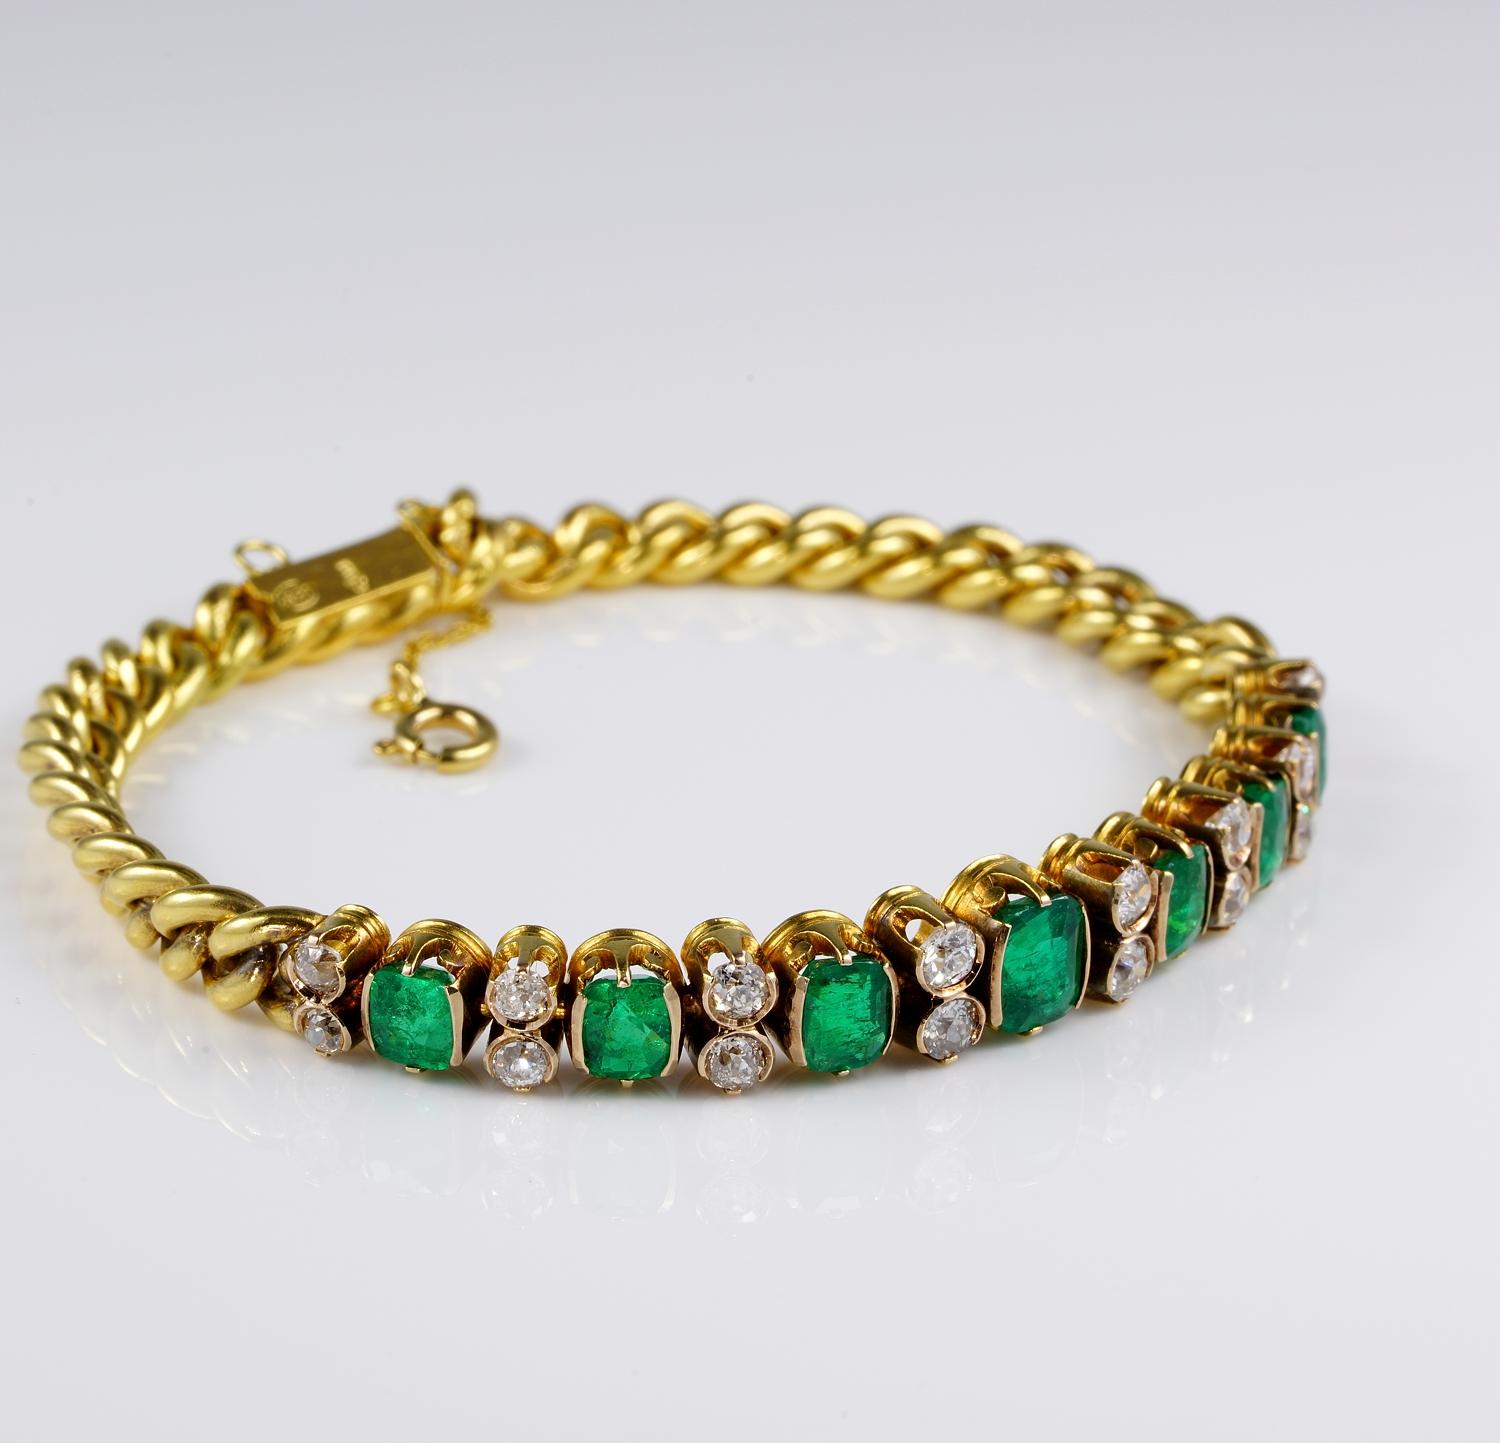 Victorian Treasure!

Absolutely stunning Victorian find, precious and very wearable 18 KT solid gold bracelet
Preciously made by the front array of natural Colombian Emeralds and old mine cut Diamonds connected by a rare Victorian solid gold curb